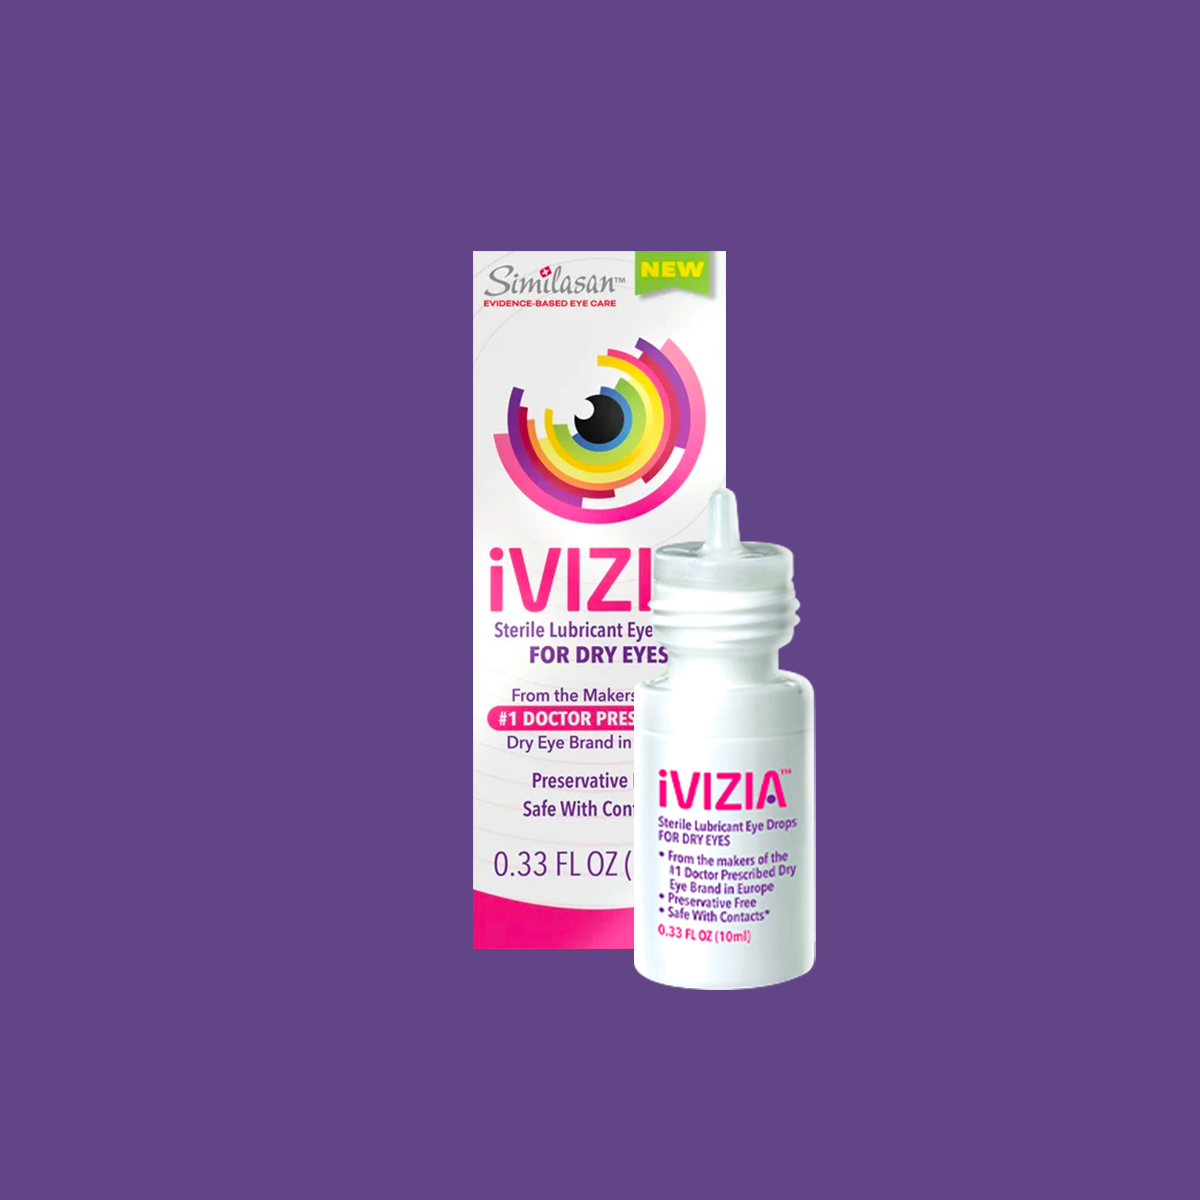 iVIZIA Sterile Lubricant Eye Drops for Dry Eyes, Preservative-Free, Dry Eye Relief, Contact Lens Friendly, 0.33 fl oz (10ml bottle)